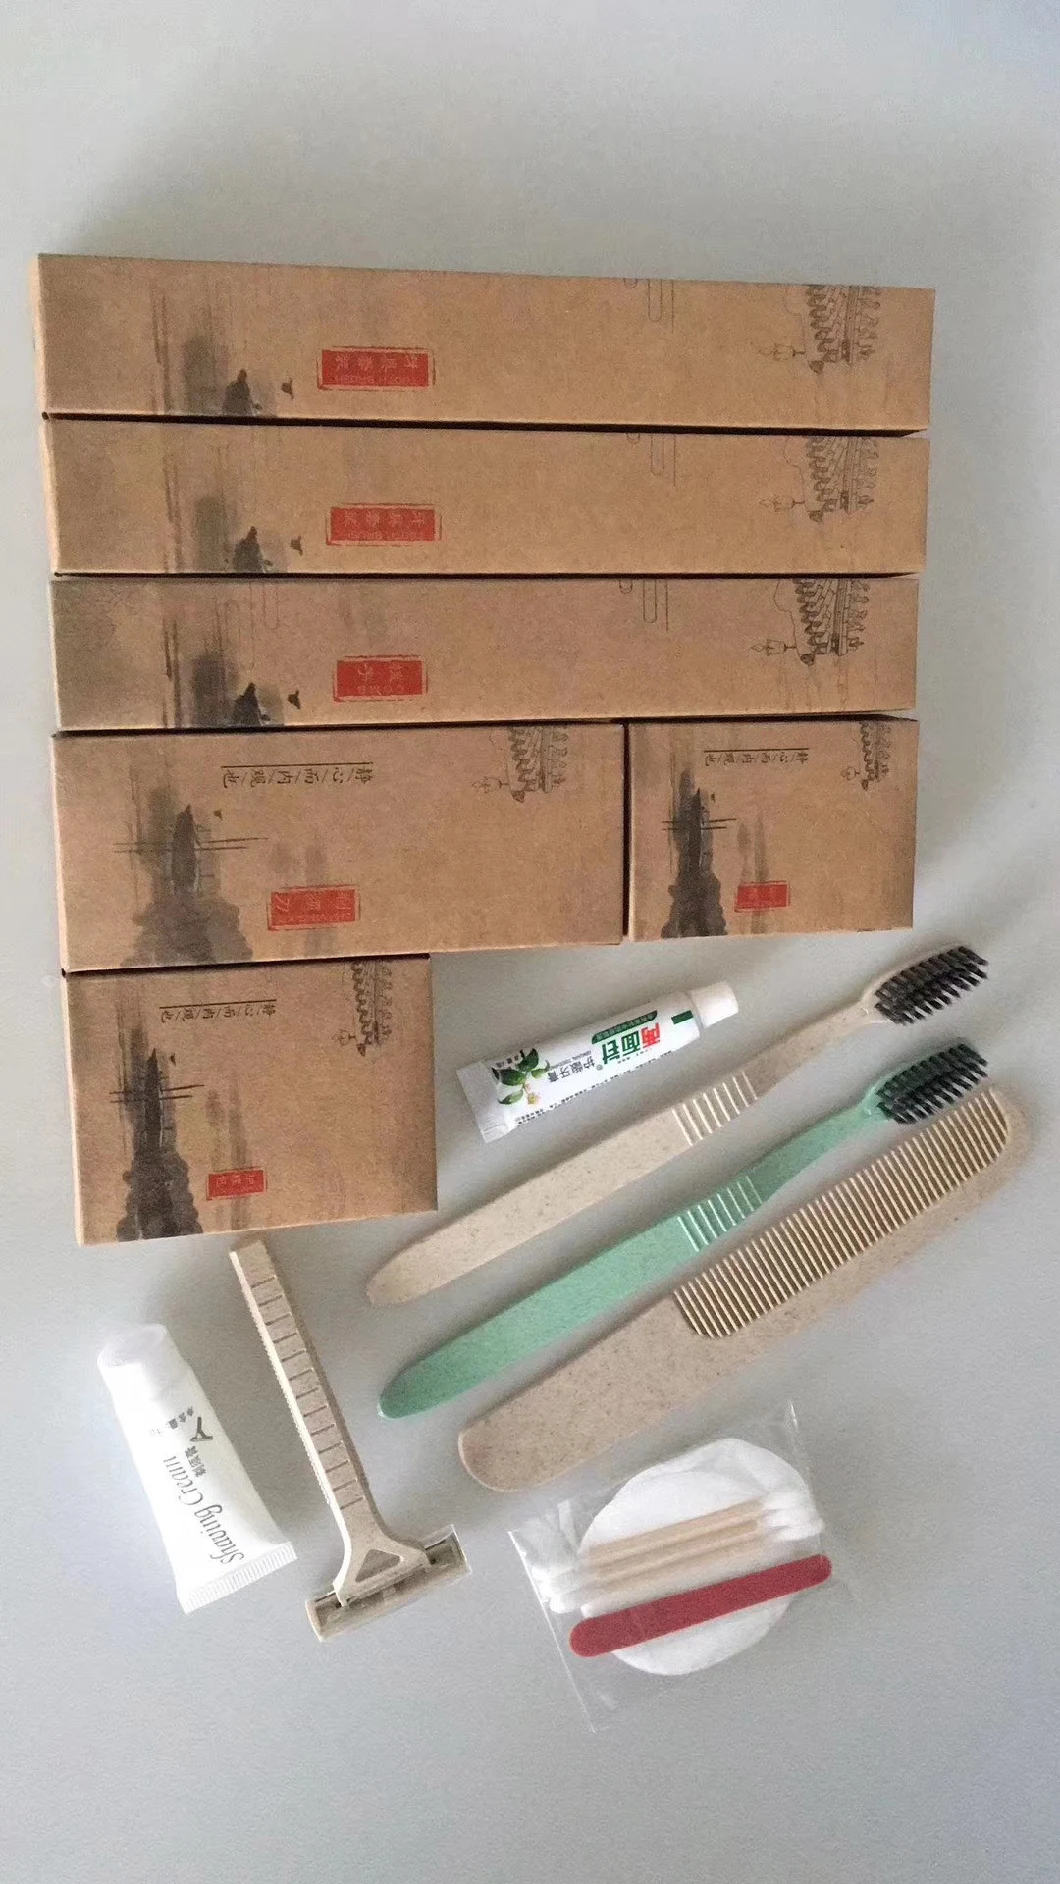 Dental Kits in Box with Hotel Amenities for Hotel Room